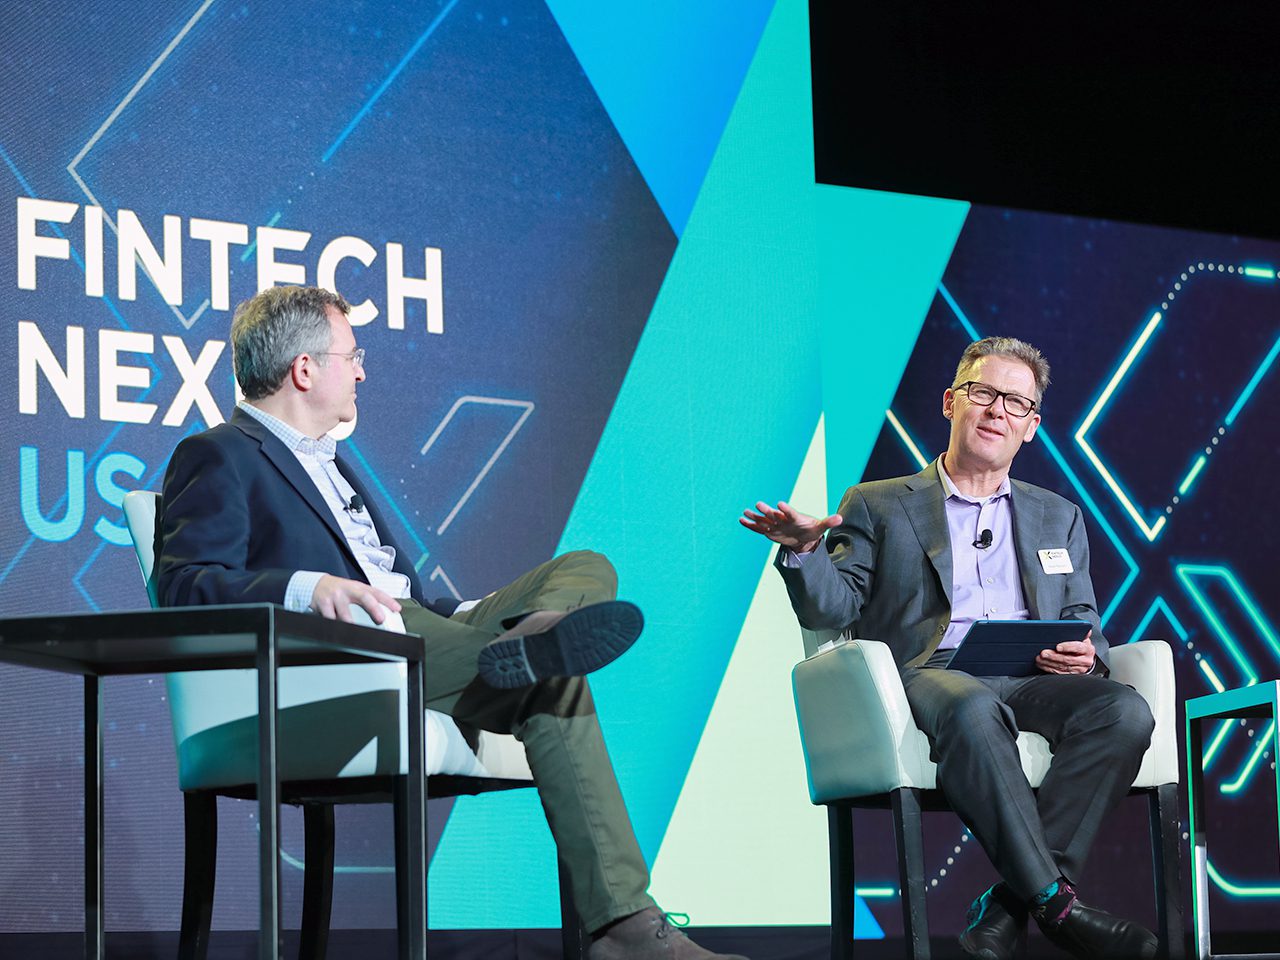 Matt Harris sits in with Peter Renton on the keynote stage at Fintech Nexus USA 2022 on May 25, 2022.